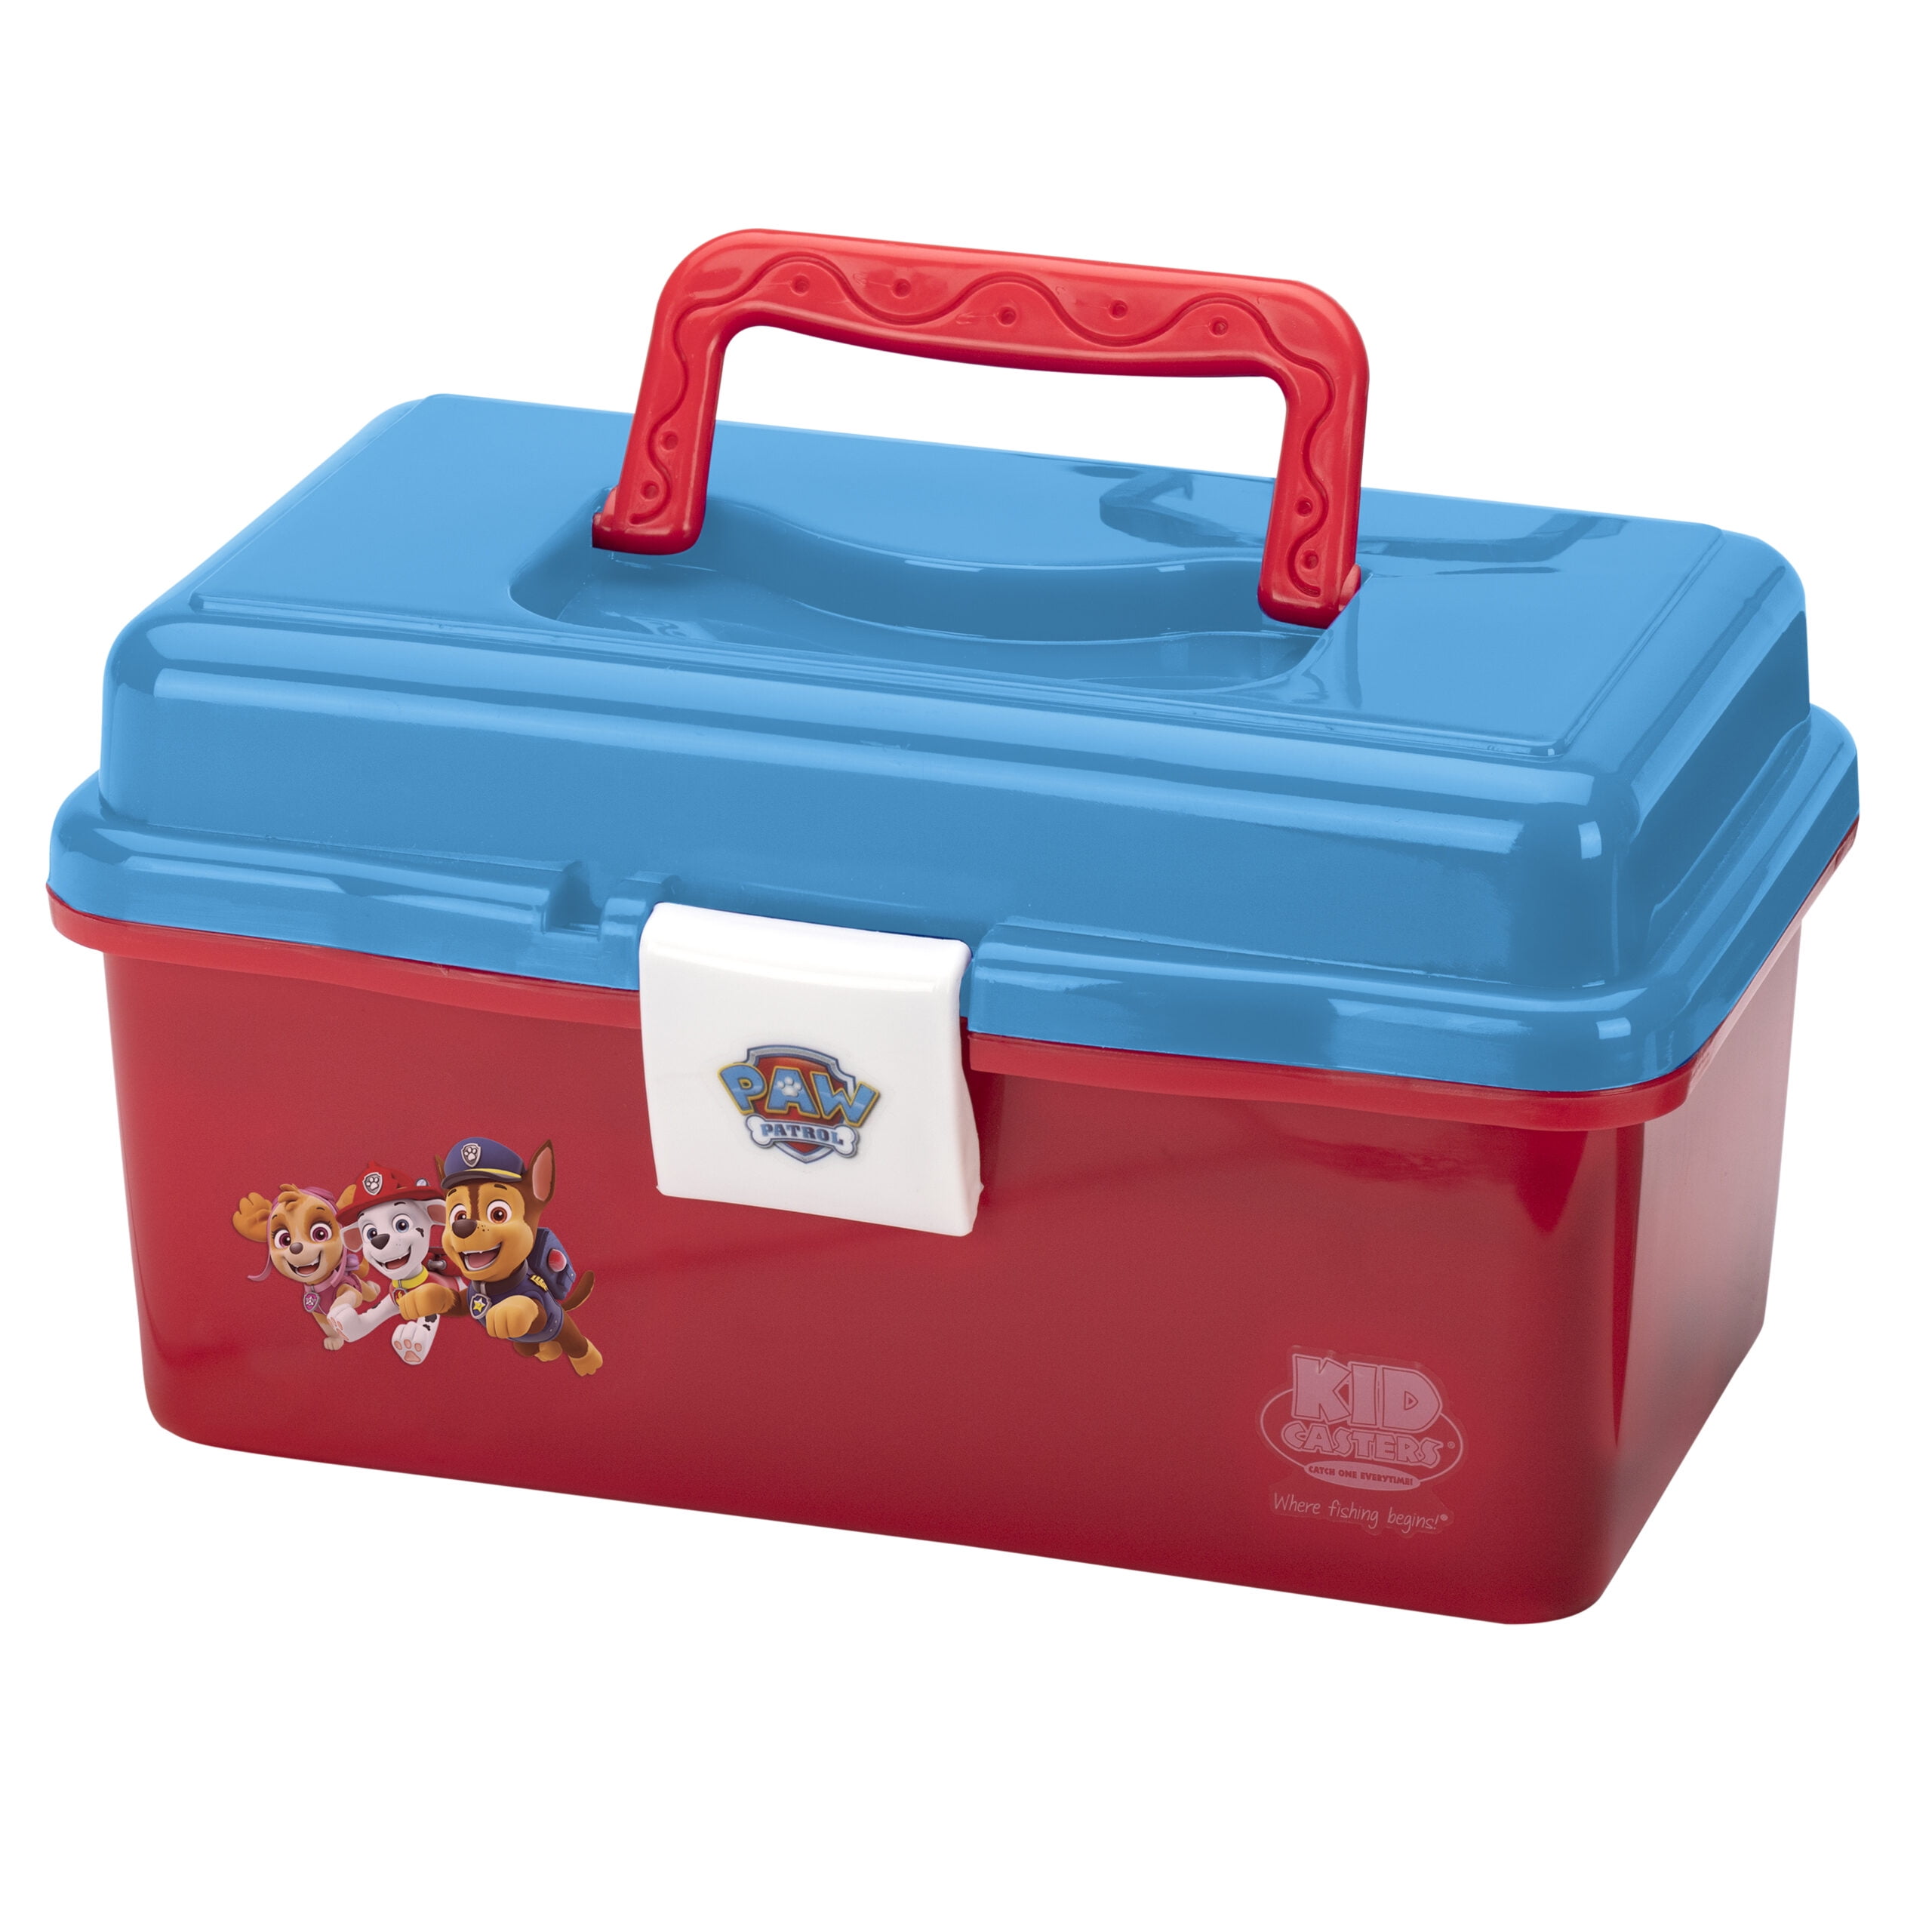  Fishing Box with Wheels 42L Fishing Gear Cooler with